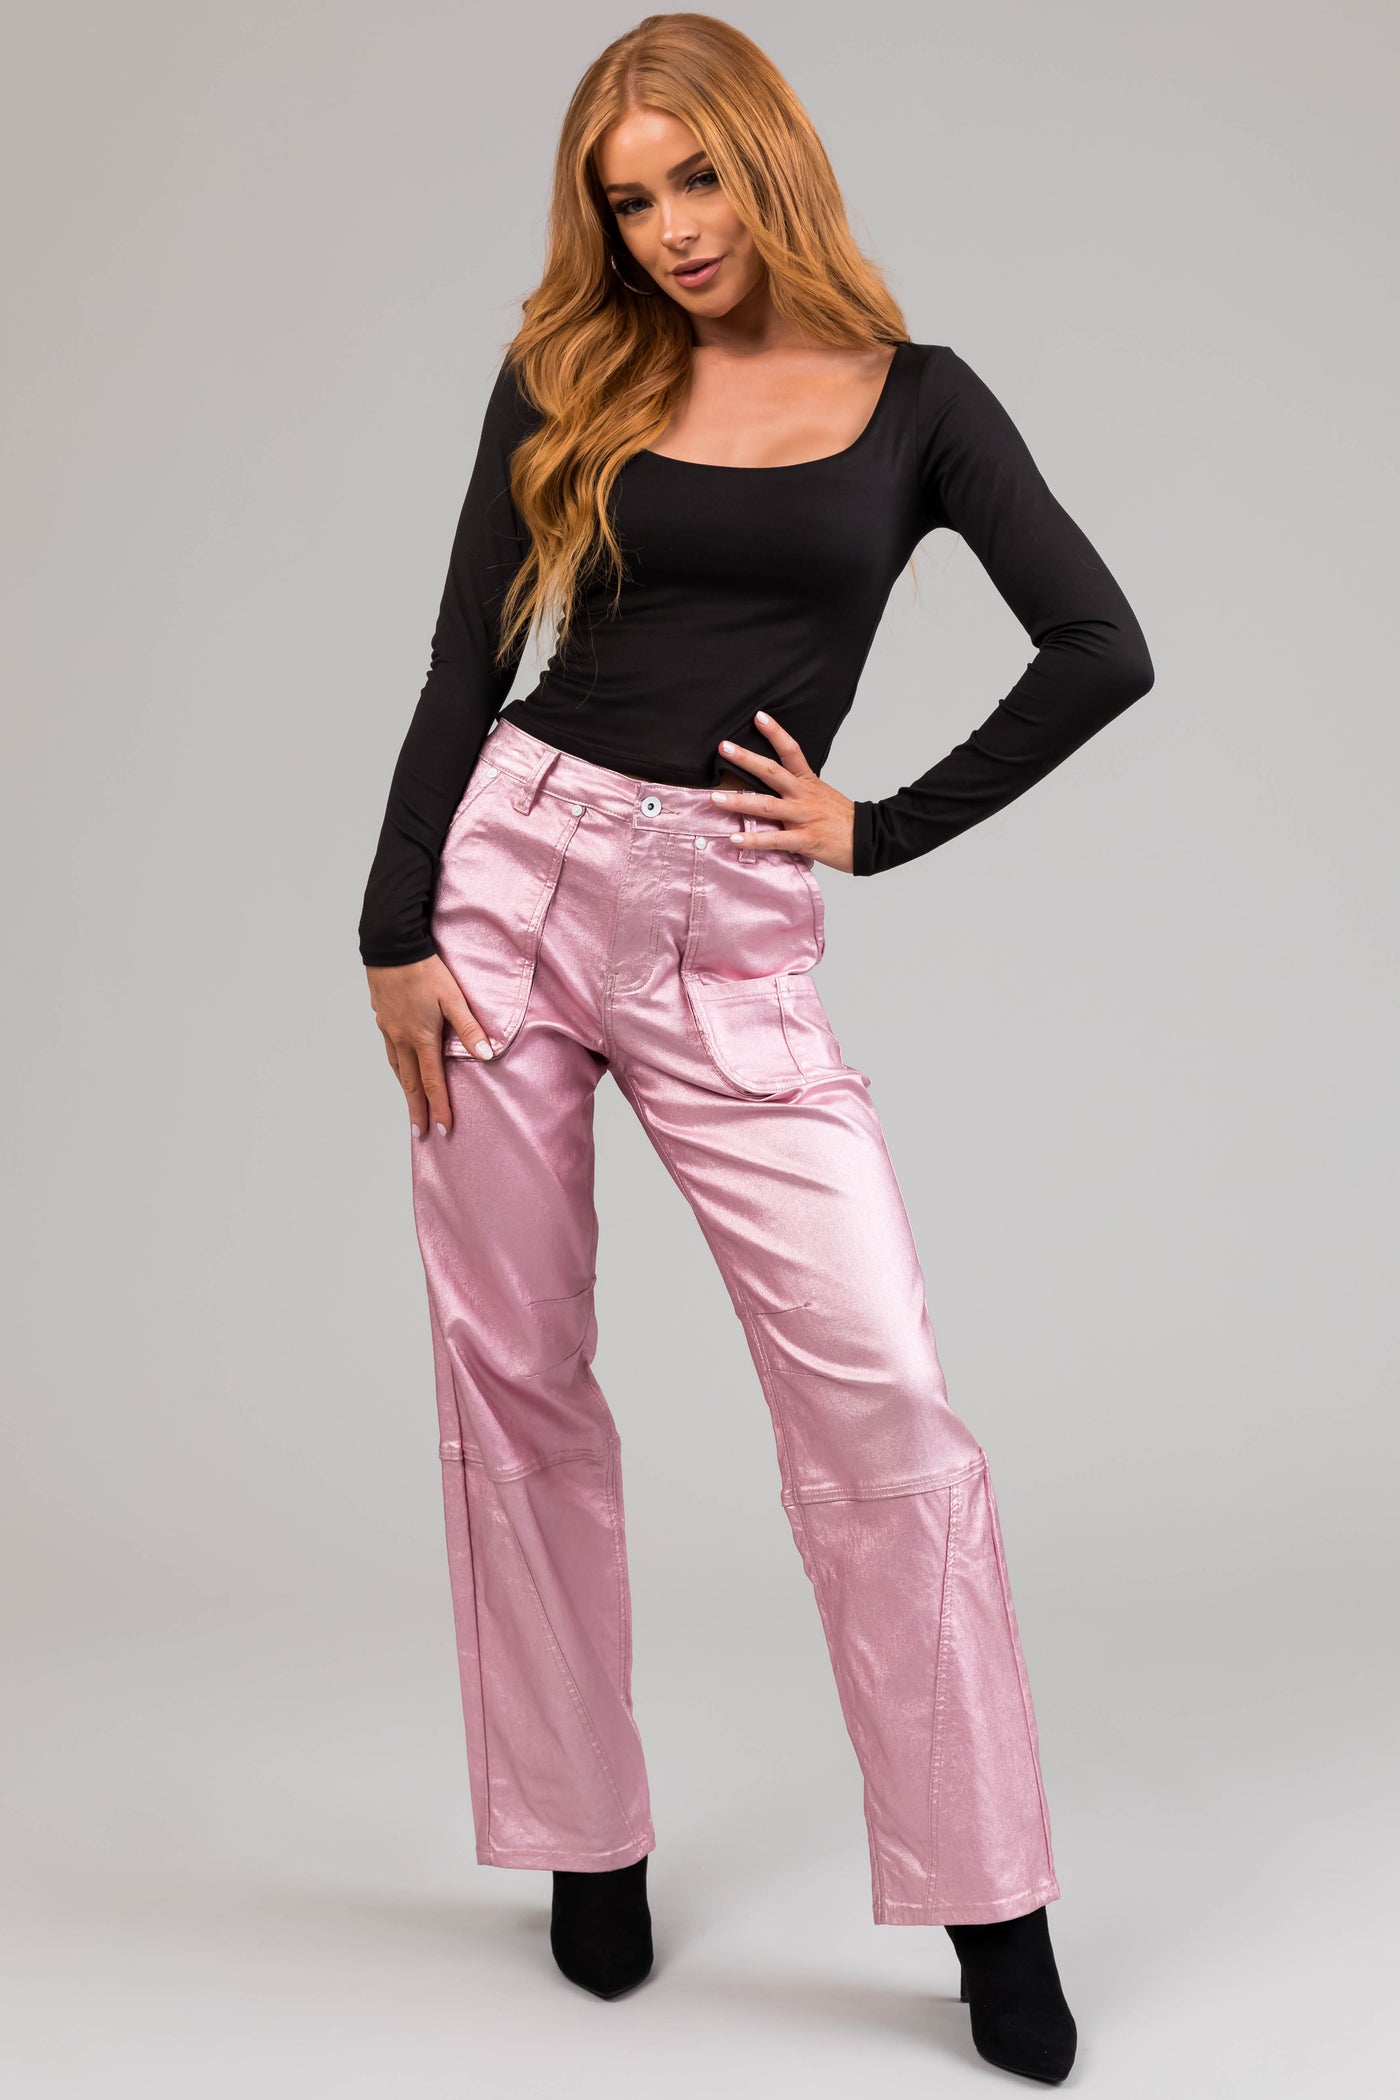 Baby Pink Cargo Pants - Limited